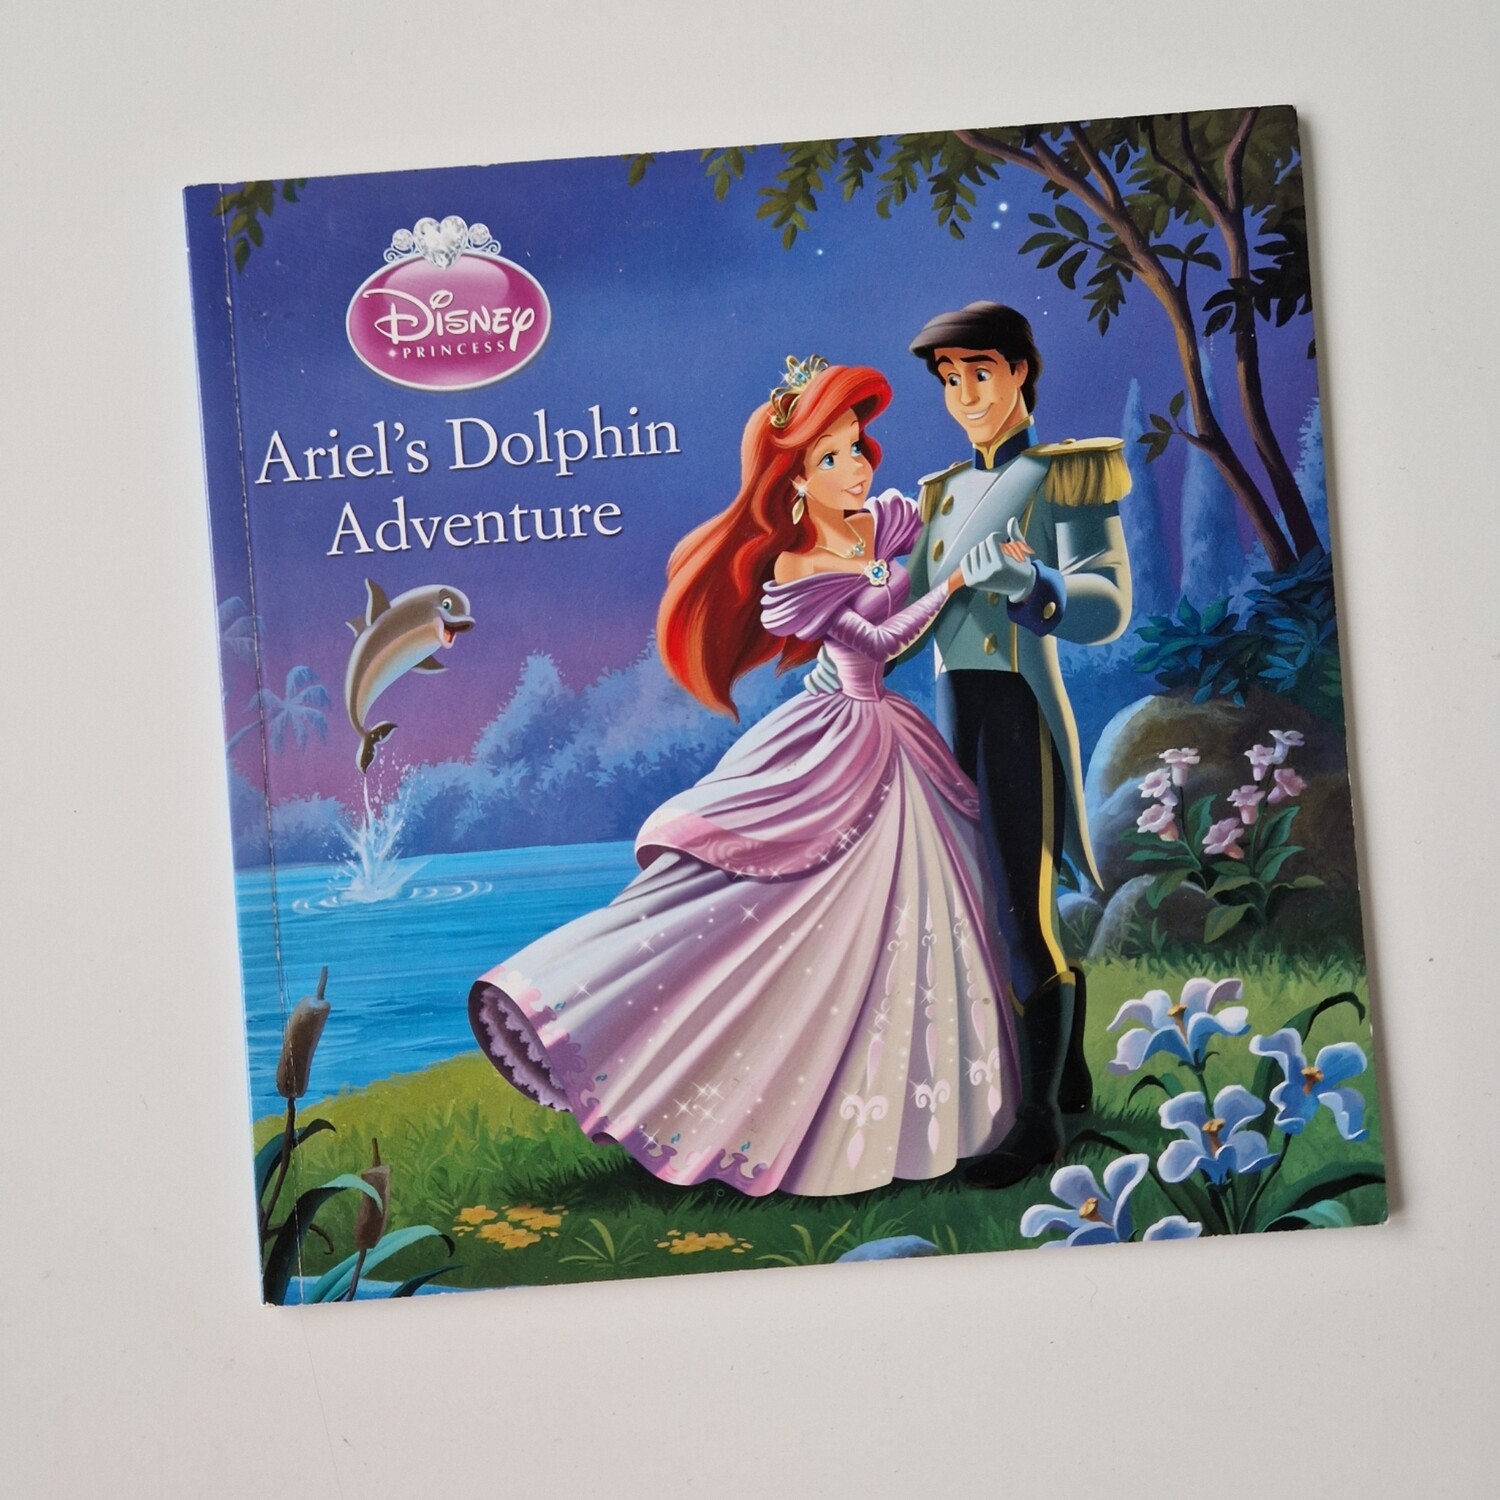 Ariel's Dolphin Adventure, Eric, Little Mermaid Notebook - made from a paperback book